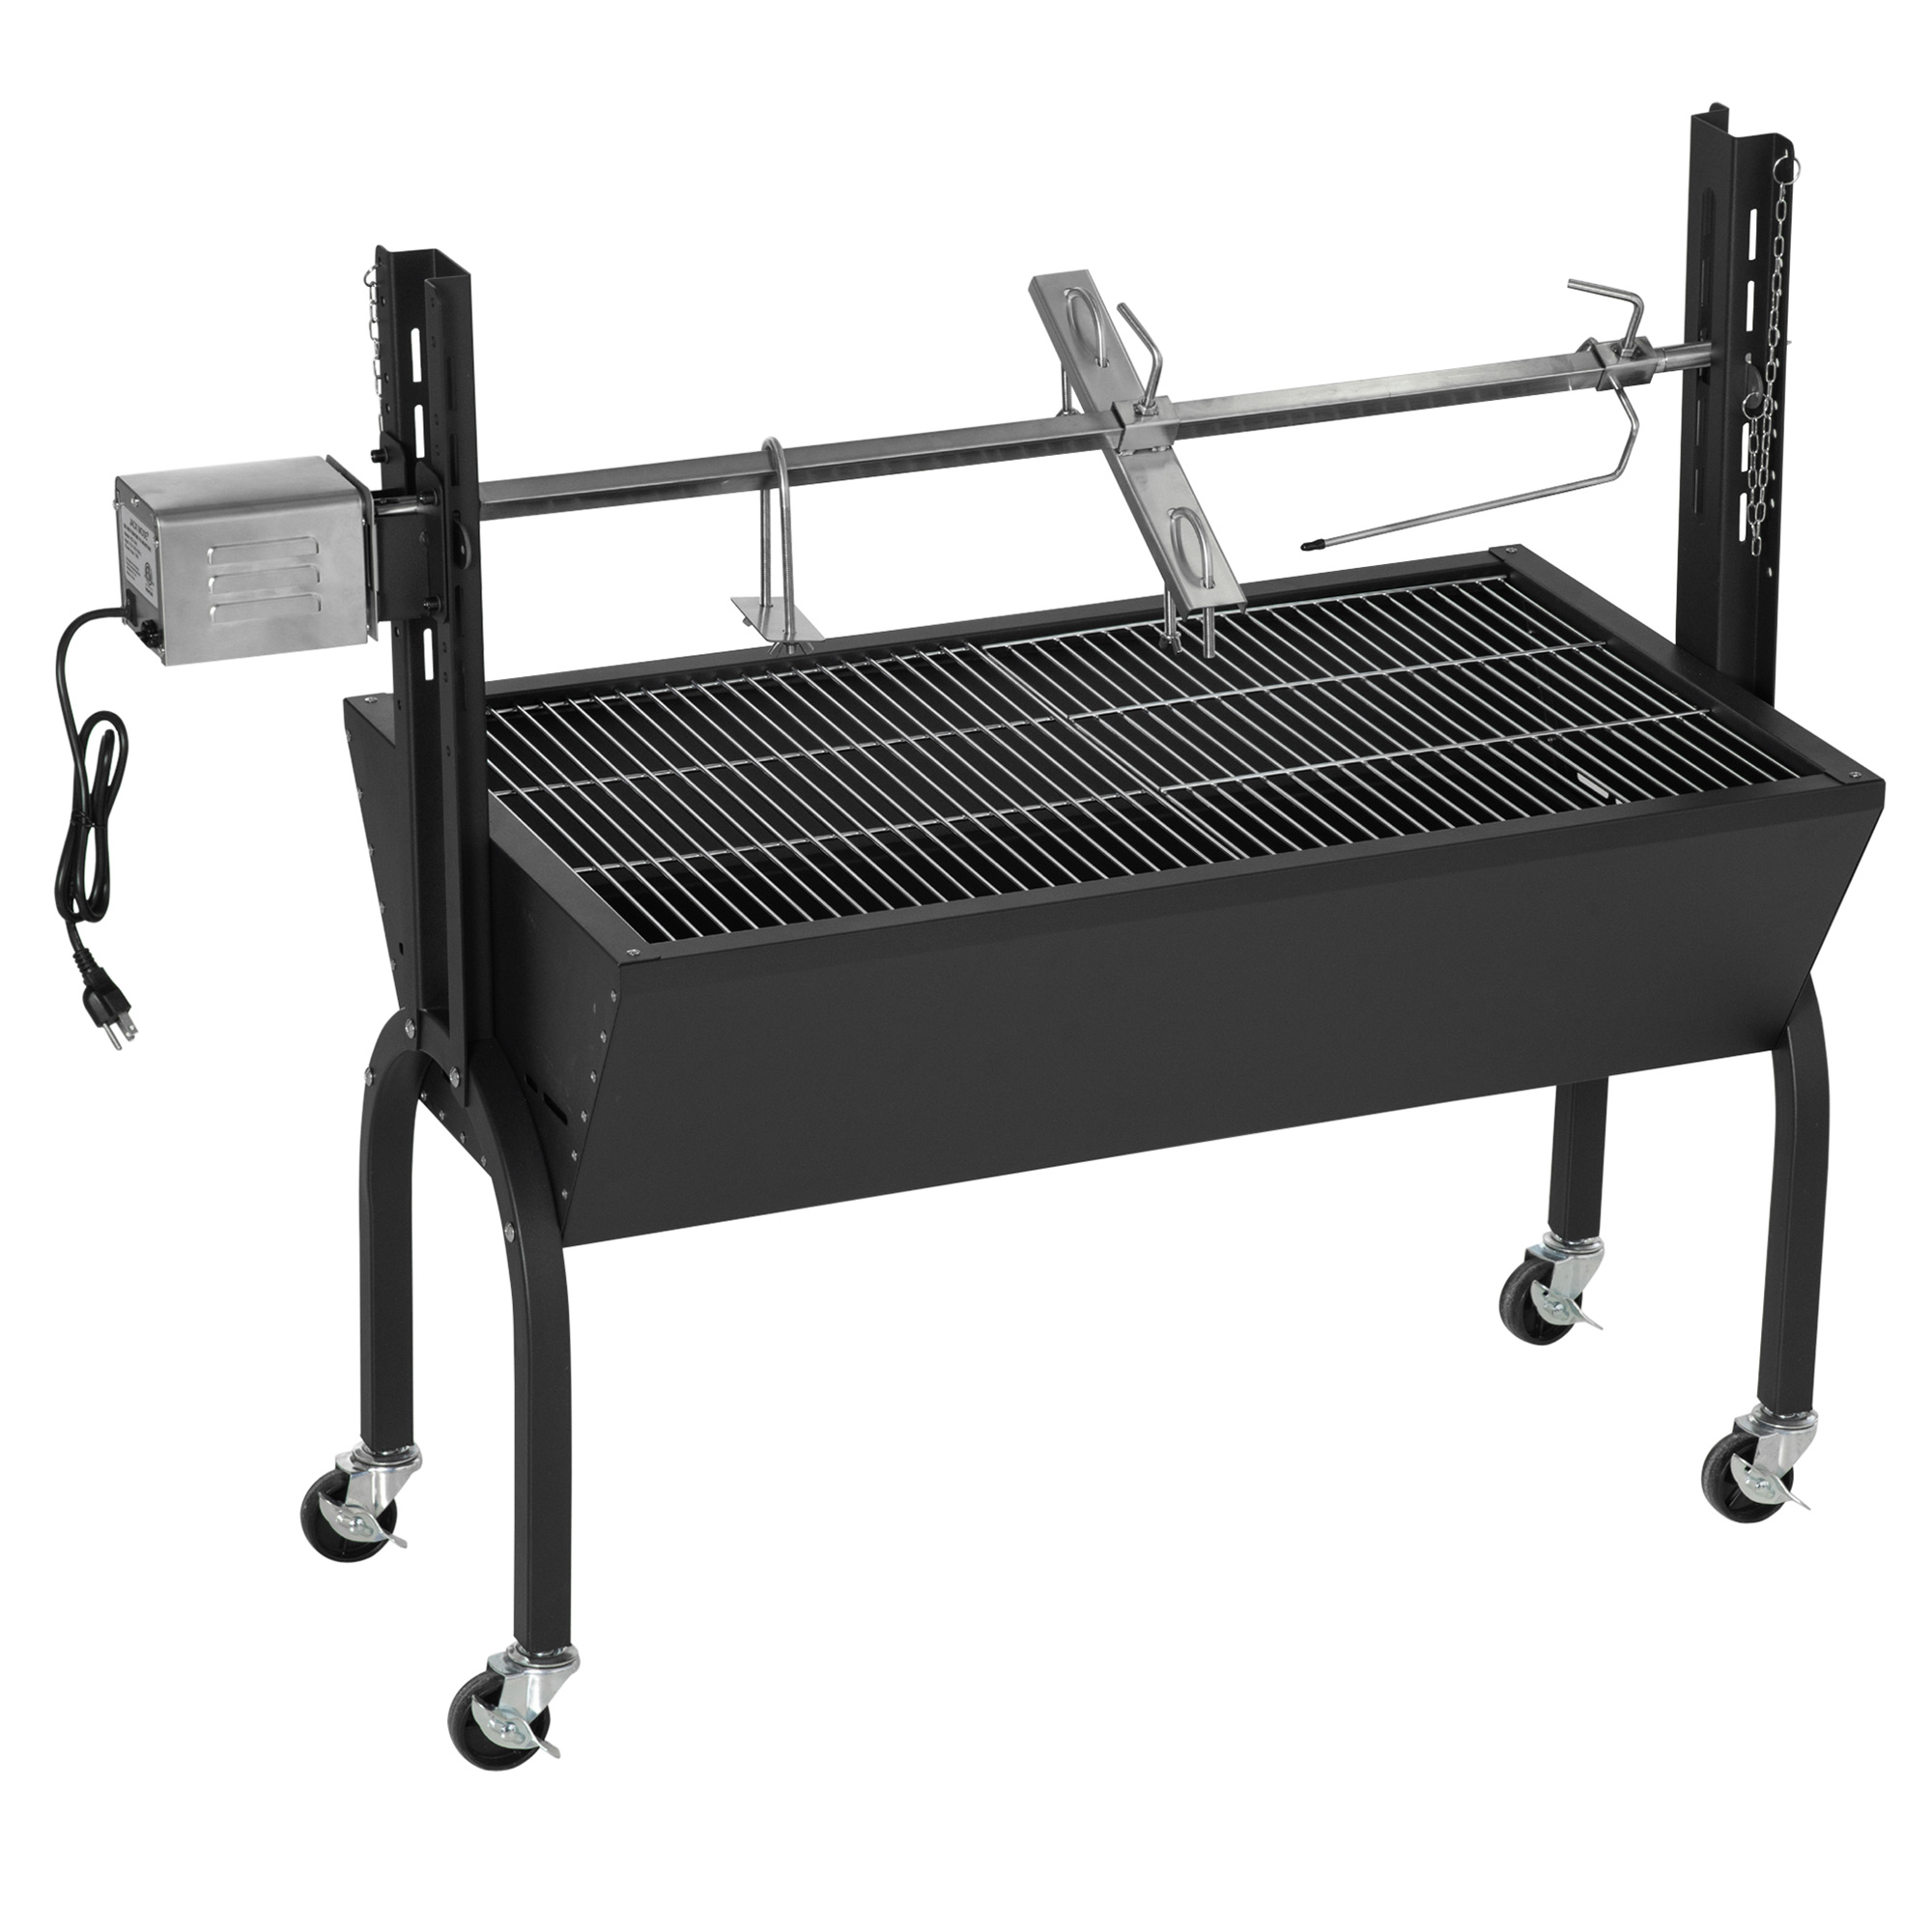 Outsunny Charcoal Bbq Rotisserie Grill Roaster 50kg Bearing Electric Roast Machine Height Adjustable Automatic Lamb Hog Spit Roaster With Wheels